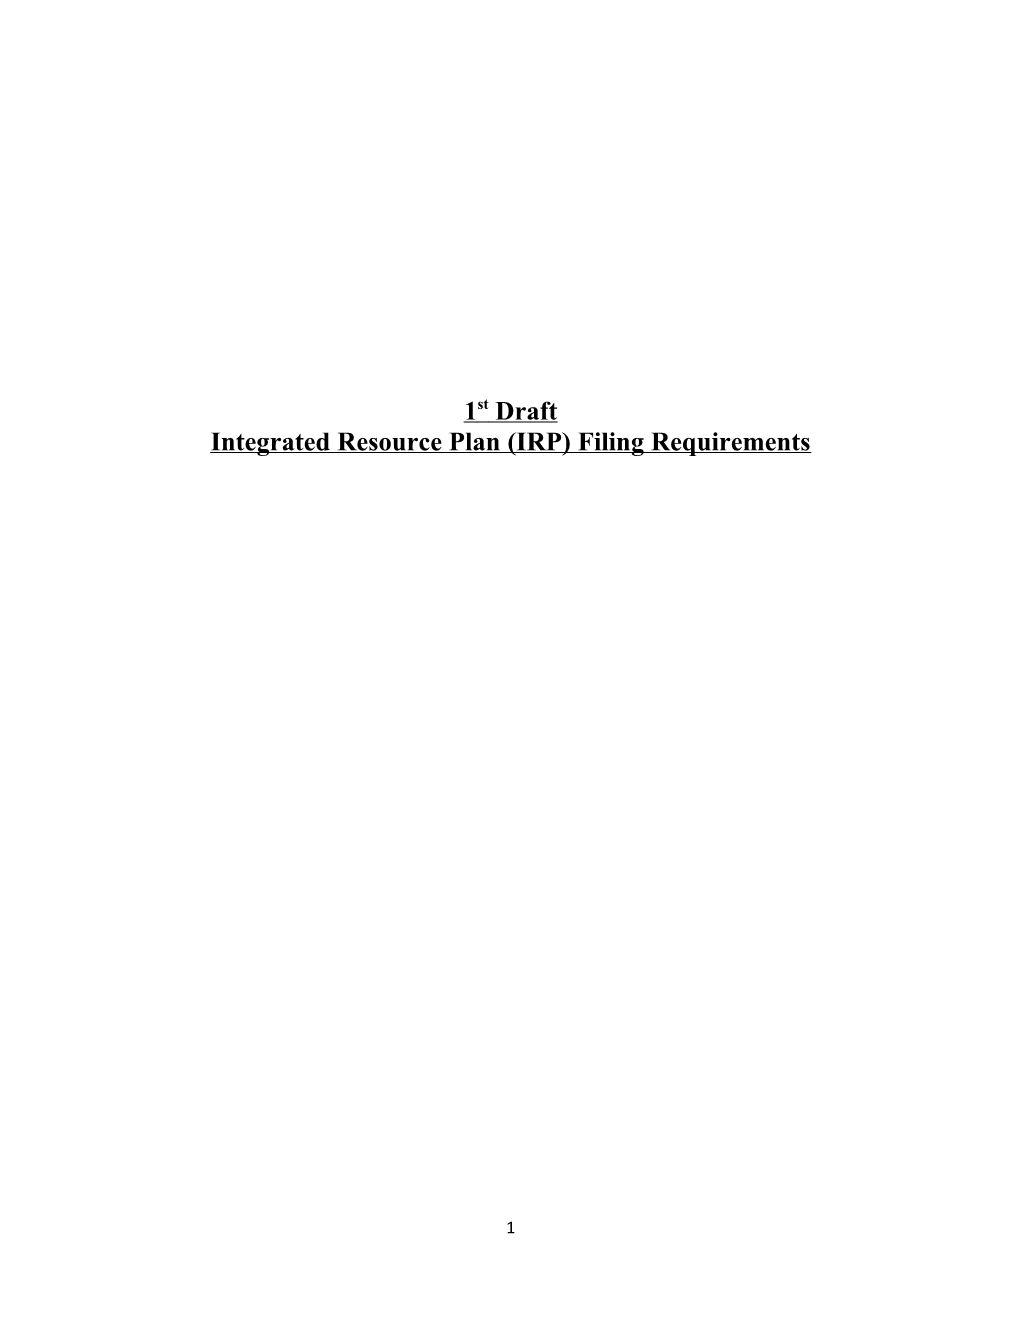 Integrated Resource Plan (IRP) Filing Requirements